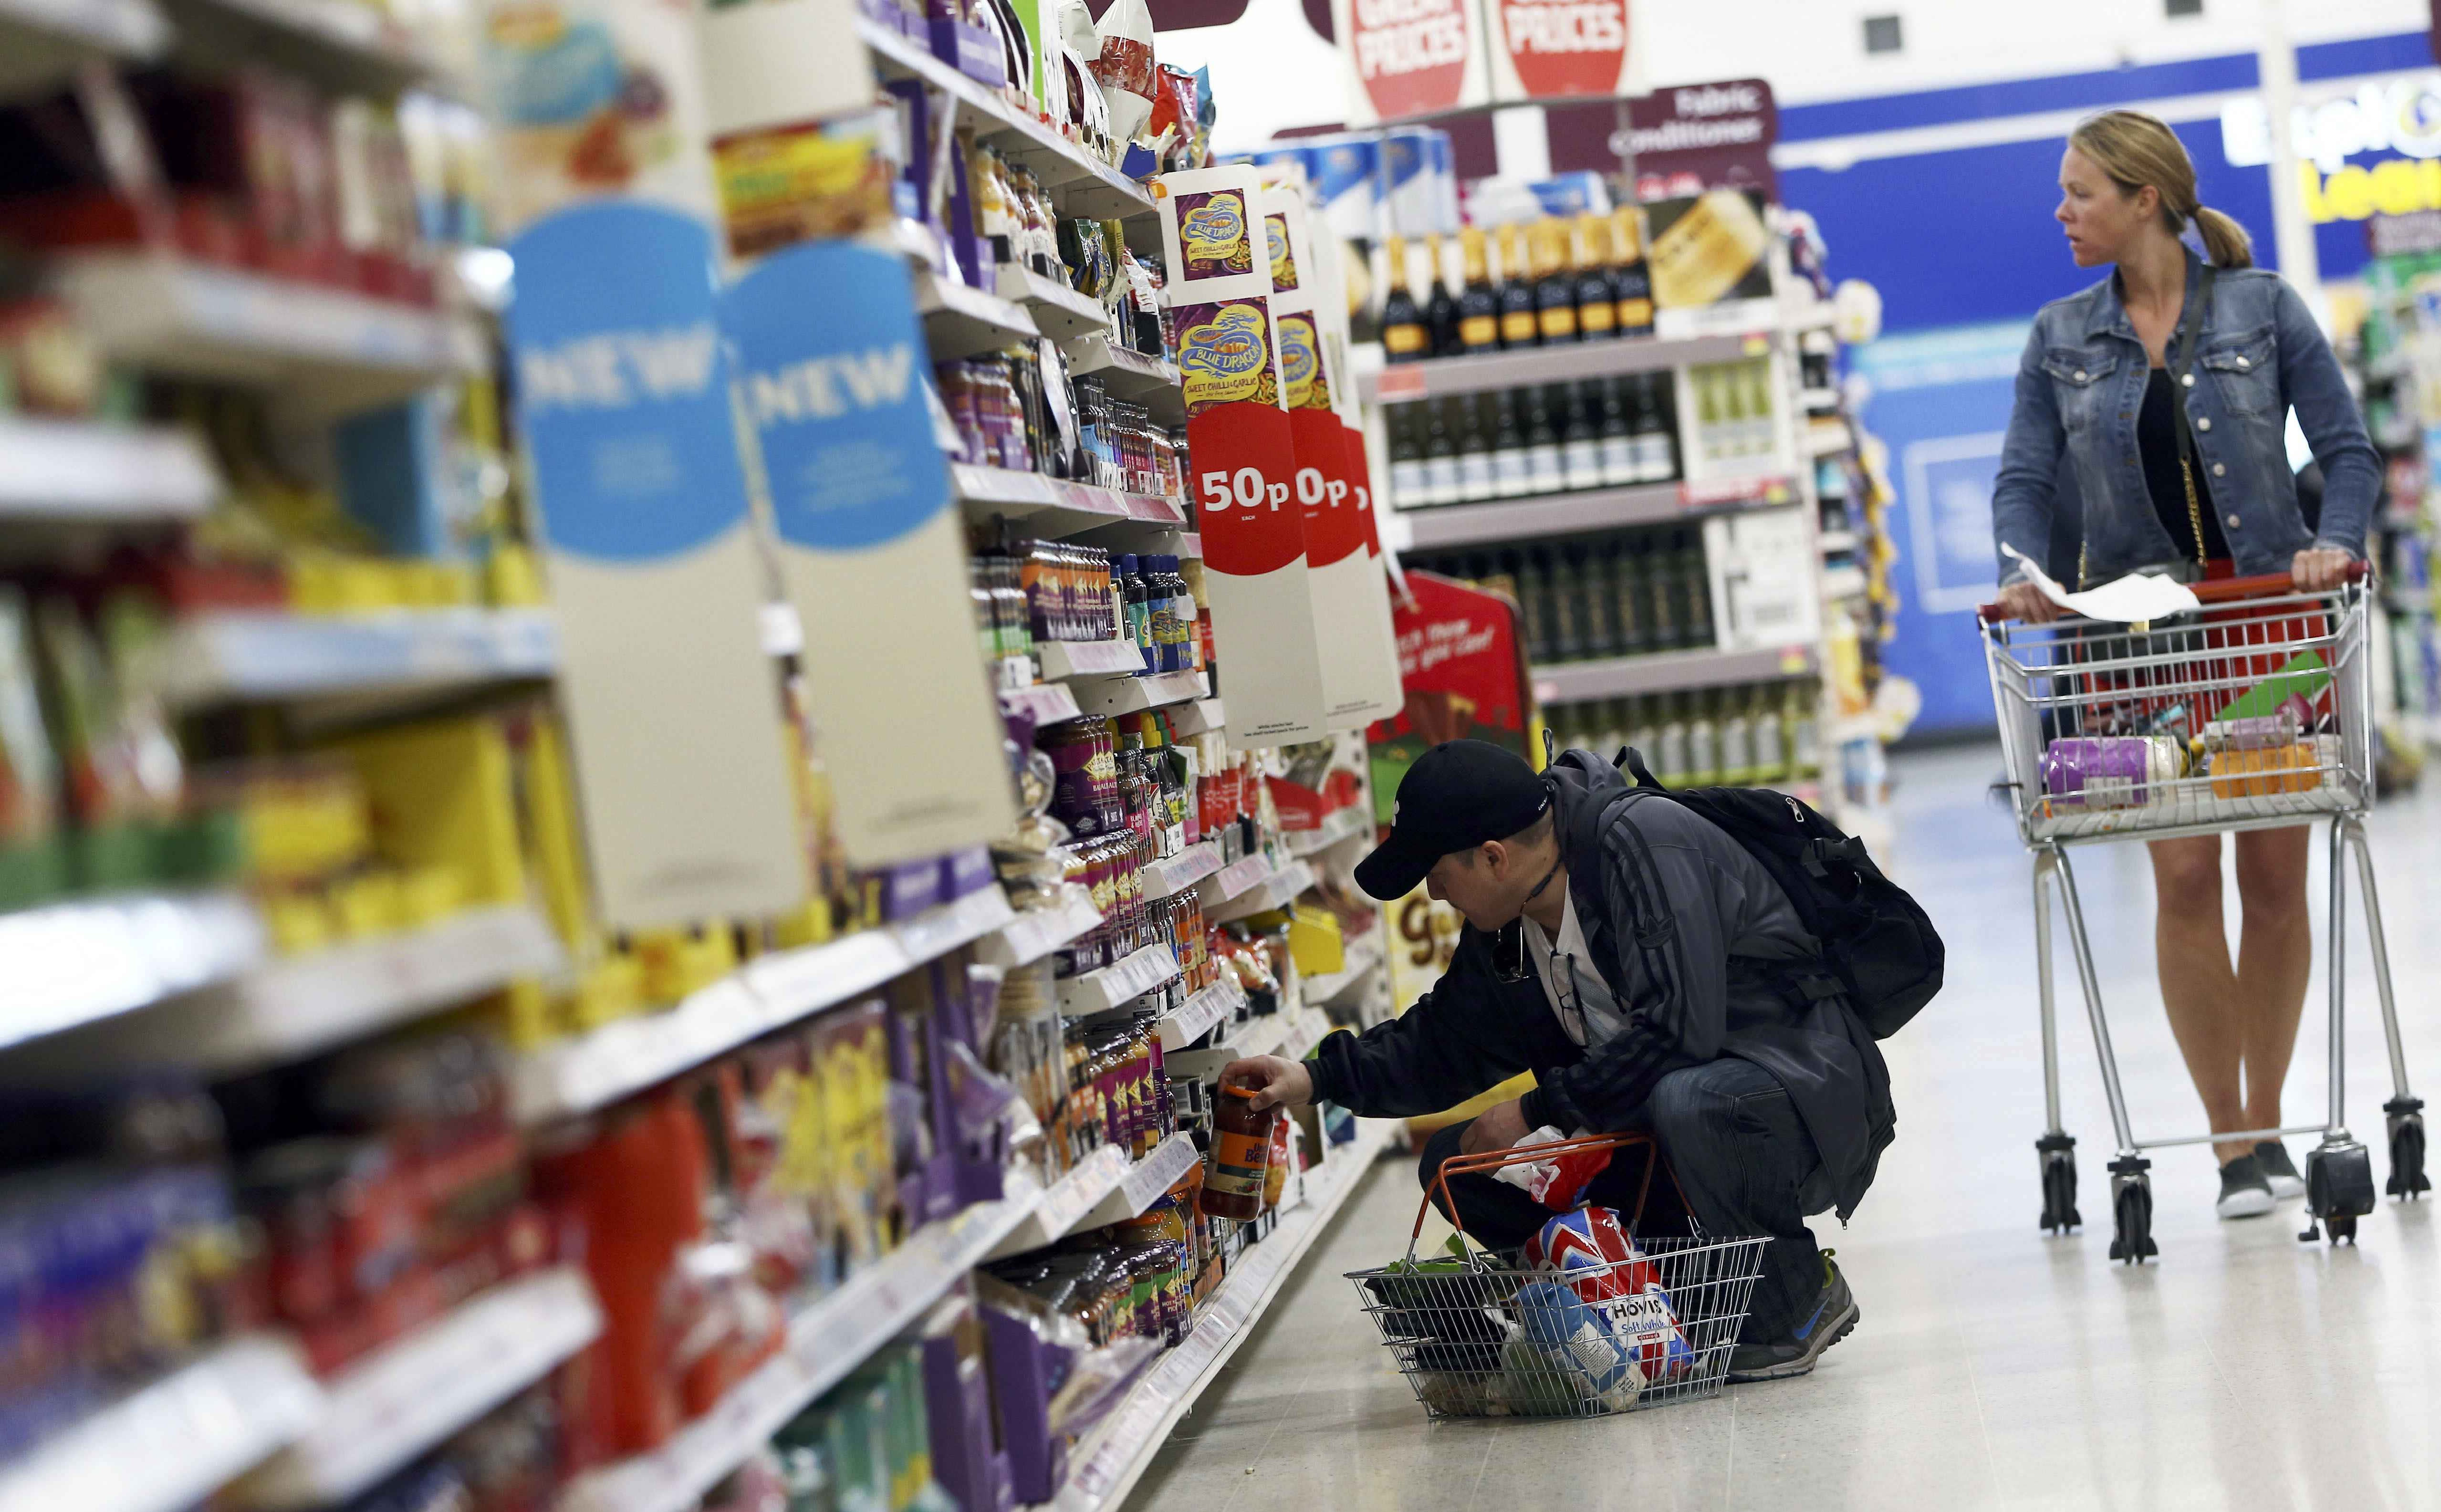 Consumer spending falls for third month in a row